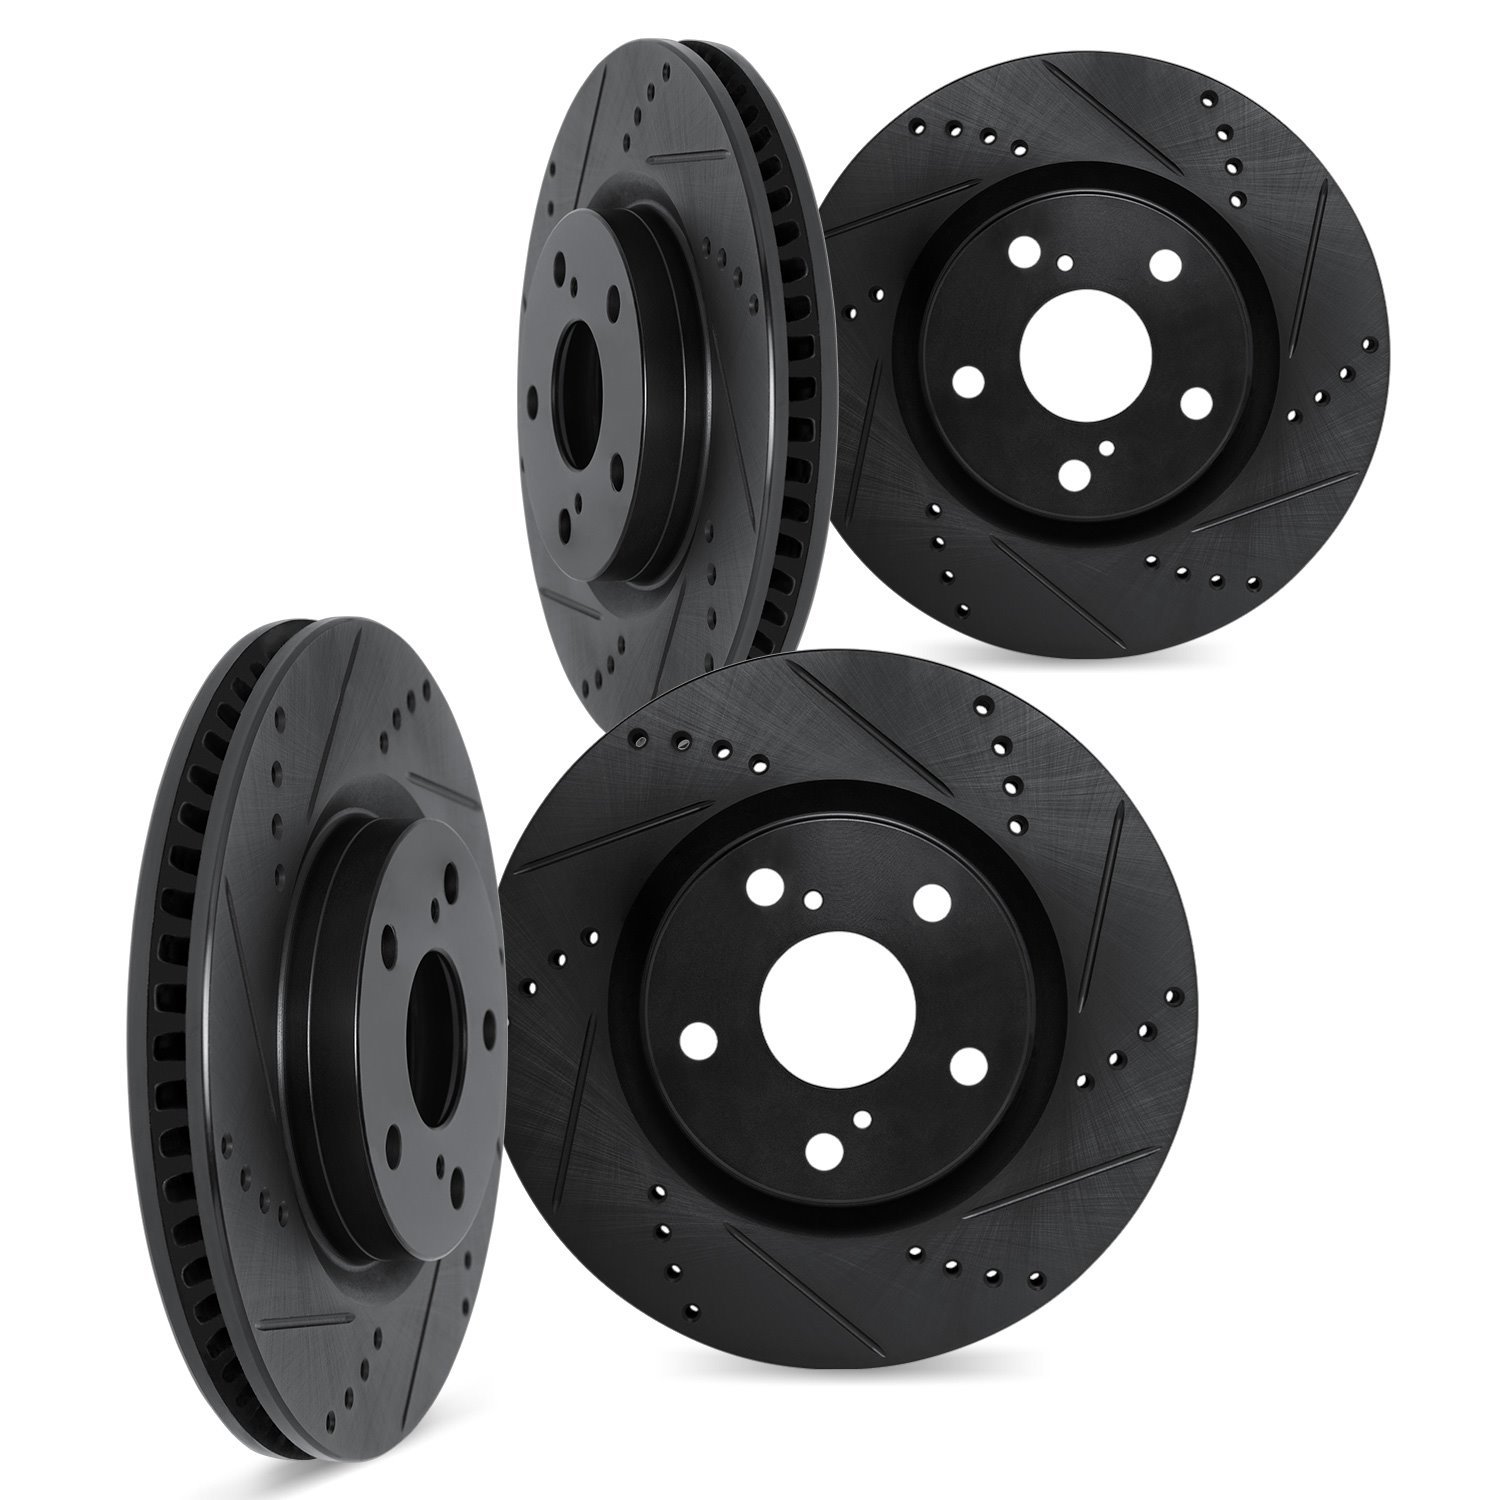 8004-31053 Drilled/Slotted Brake Rotors [Black], 2004-2010 BMW, Position: Front and Rear